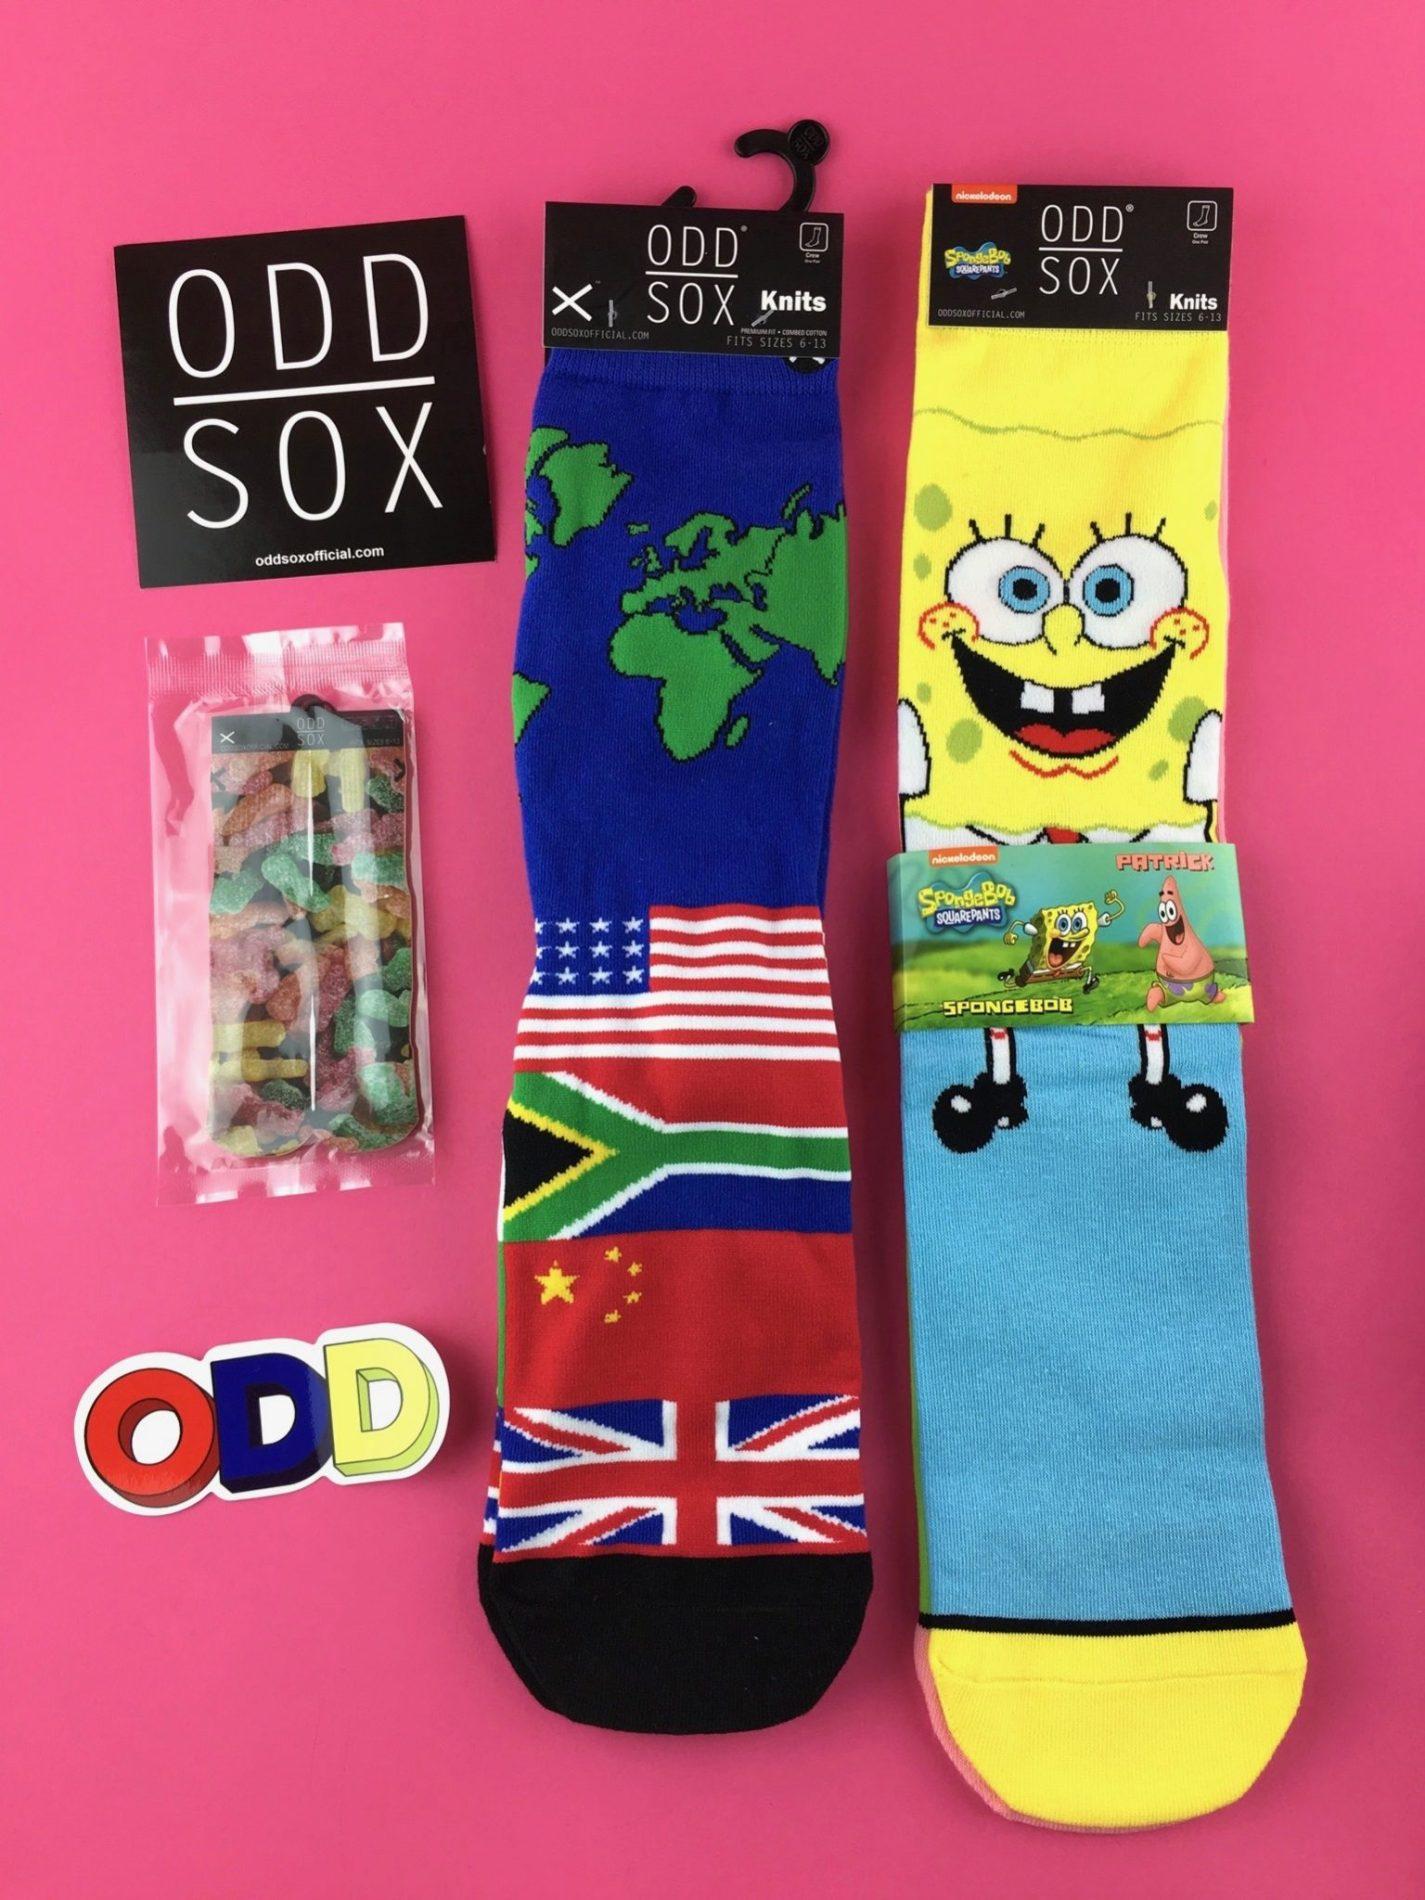 Read more about the article Odd Sox The Sox Box Review – February 2018